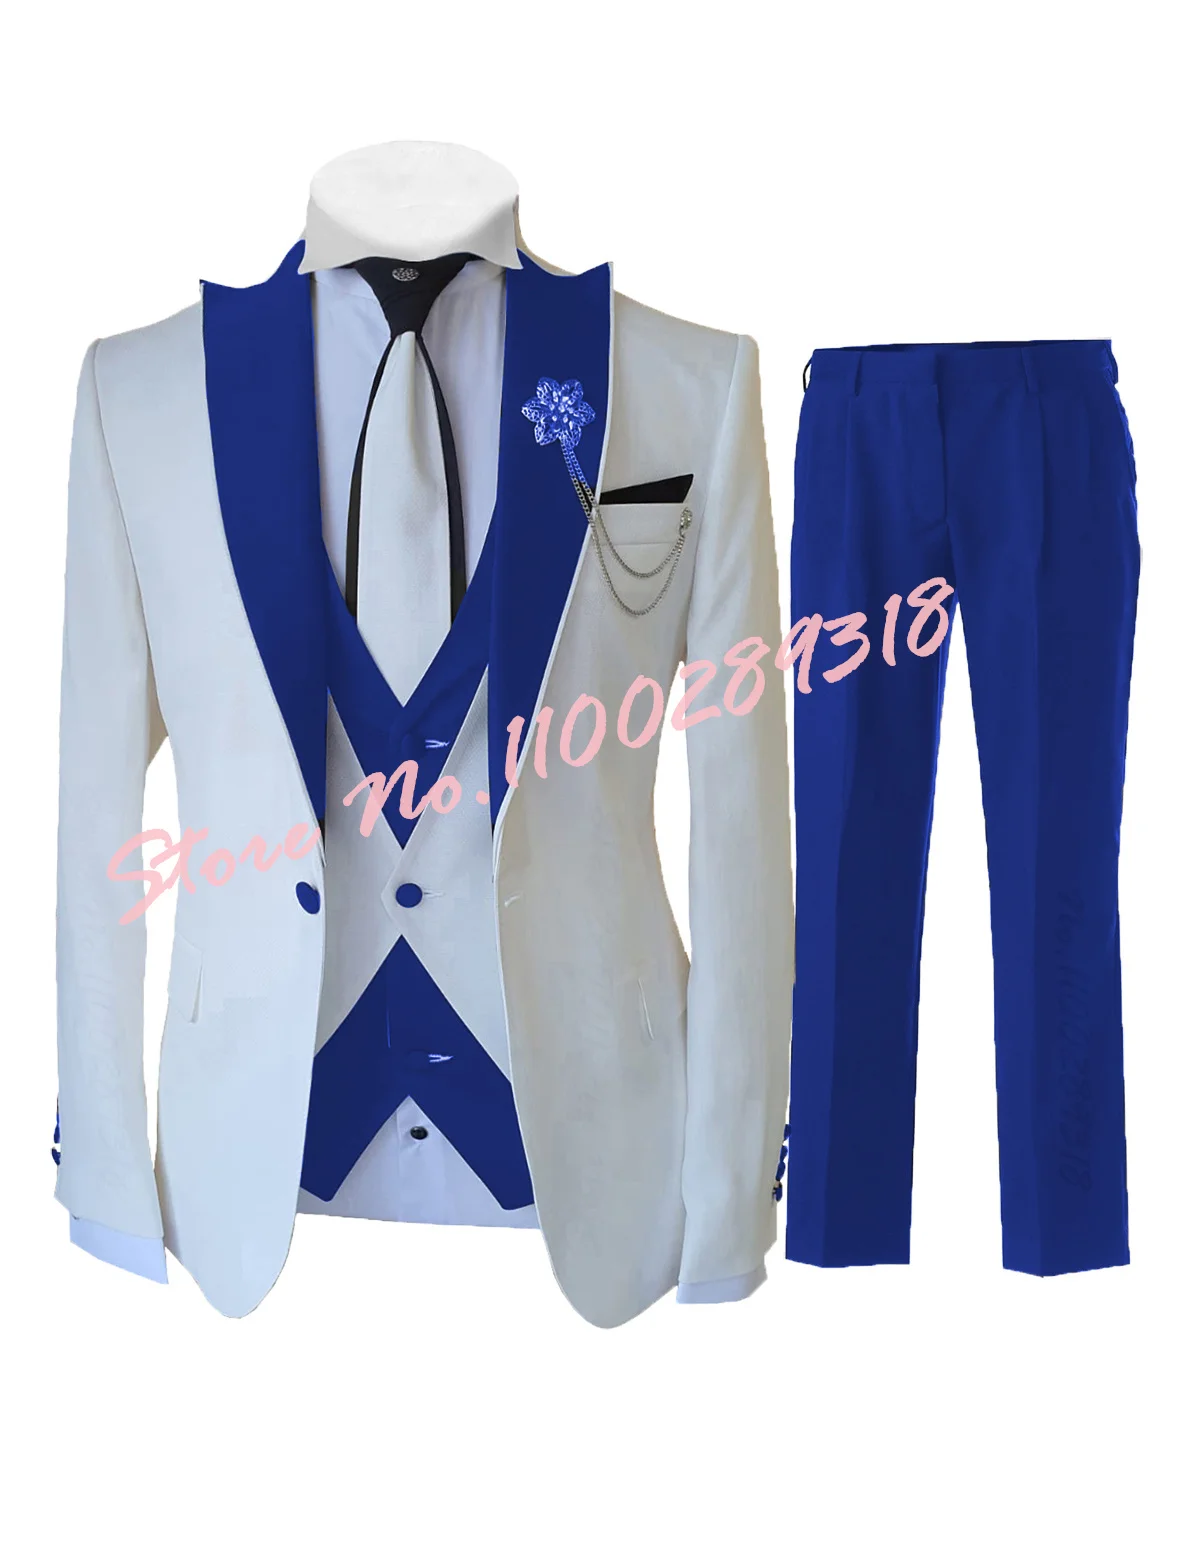 2023-Tailor-made-White-Suits-For-Men-3-Piece-Set-Slim-Fit-Formal ...